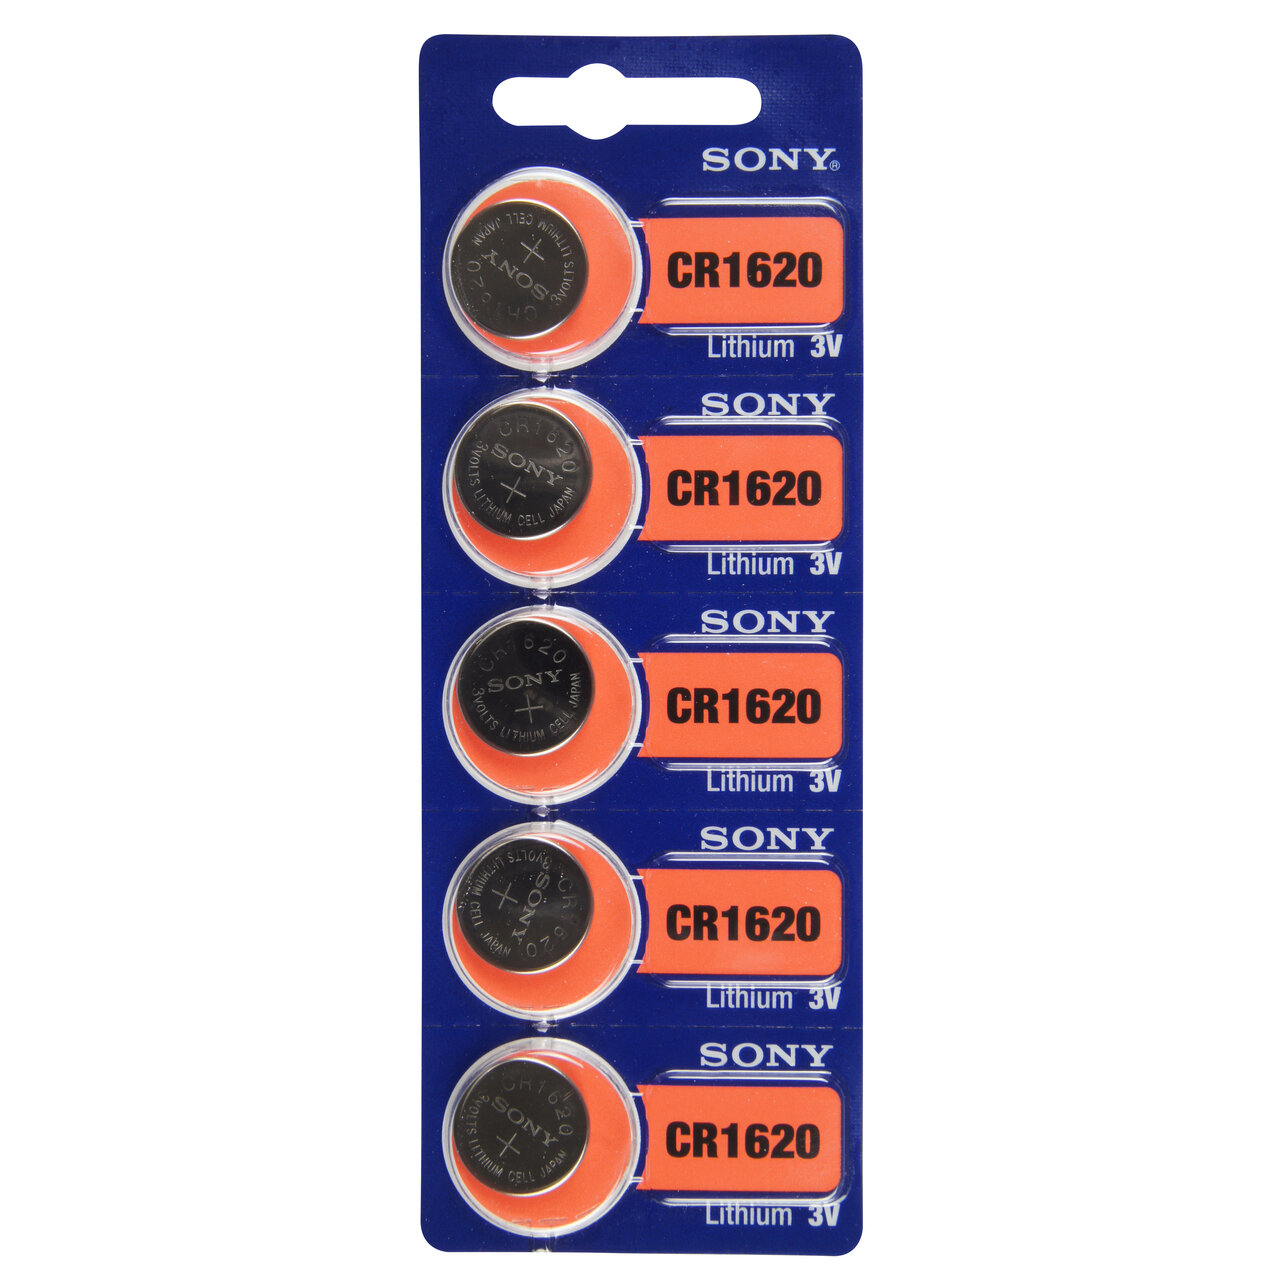 Type 1620 SONY Lithium Battery Tear Strip Pack of 5 SWB1620